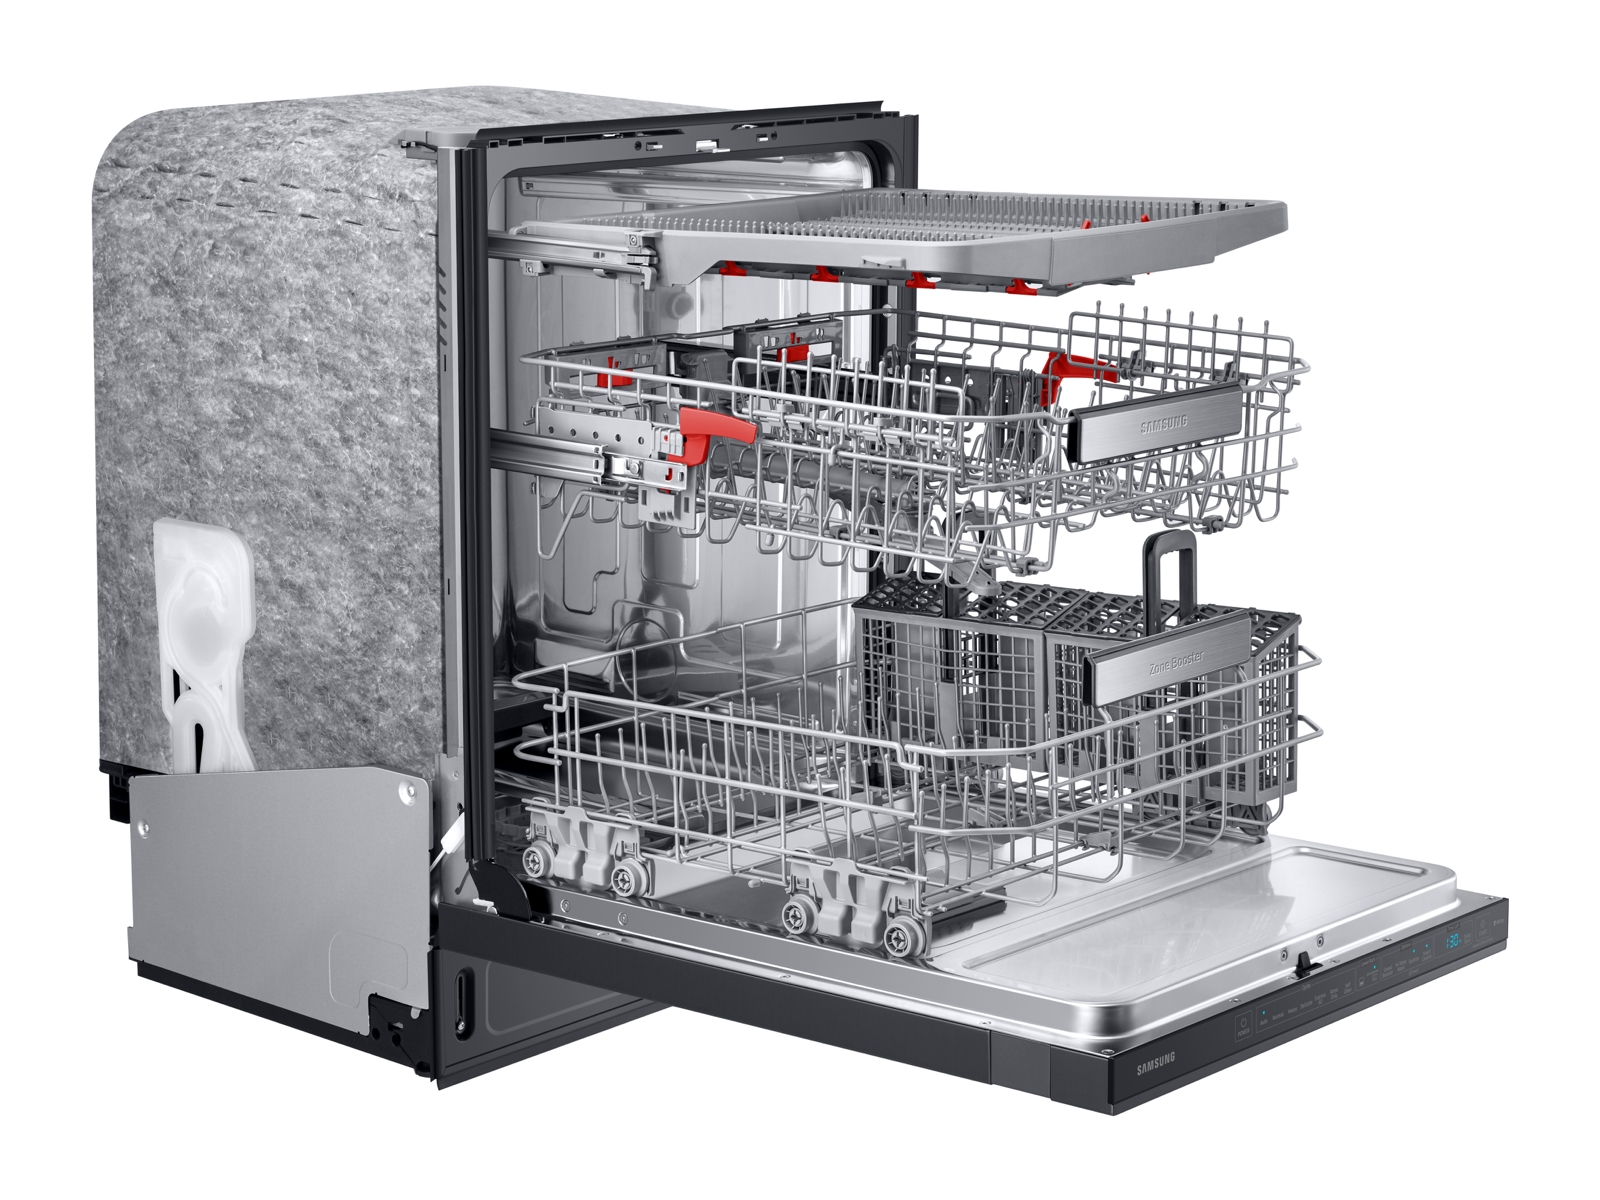 Thumbnail image of AutoRelease Smart 39dBA Dishwasher with Linear Wash in Black Stainless Steel